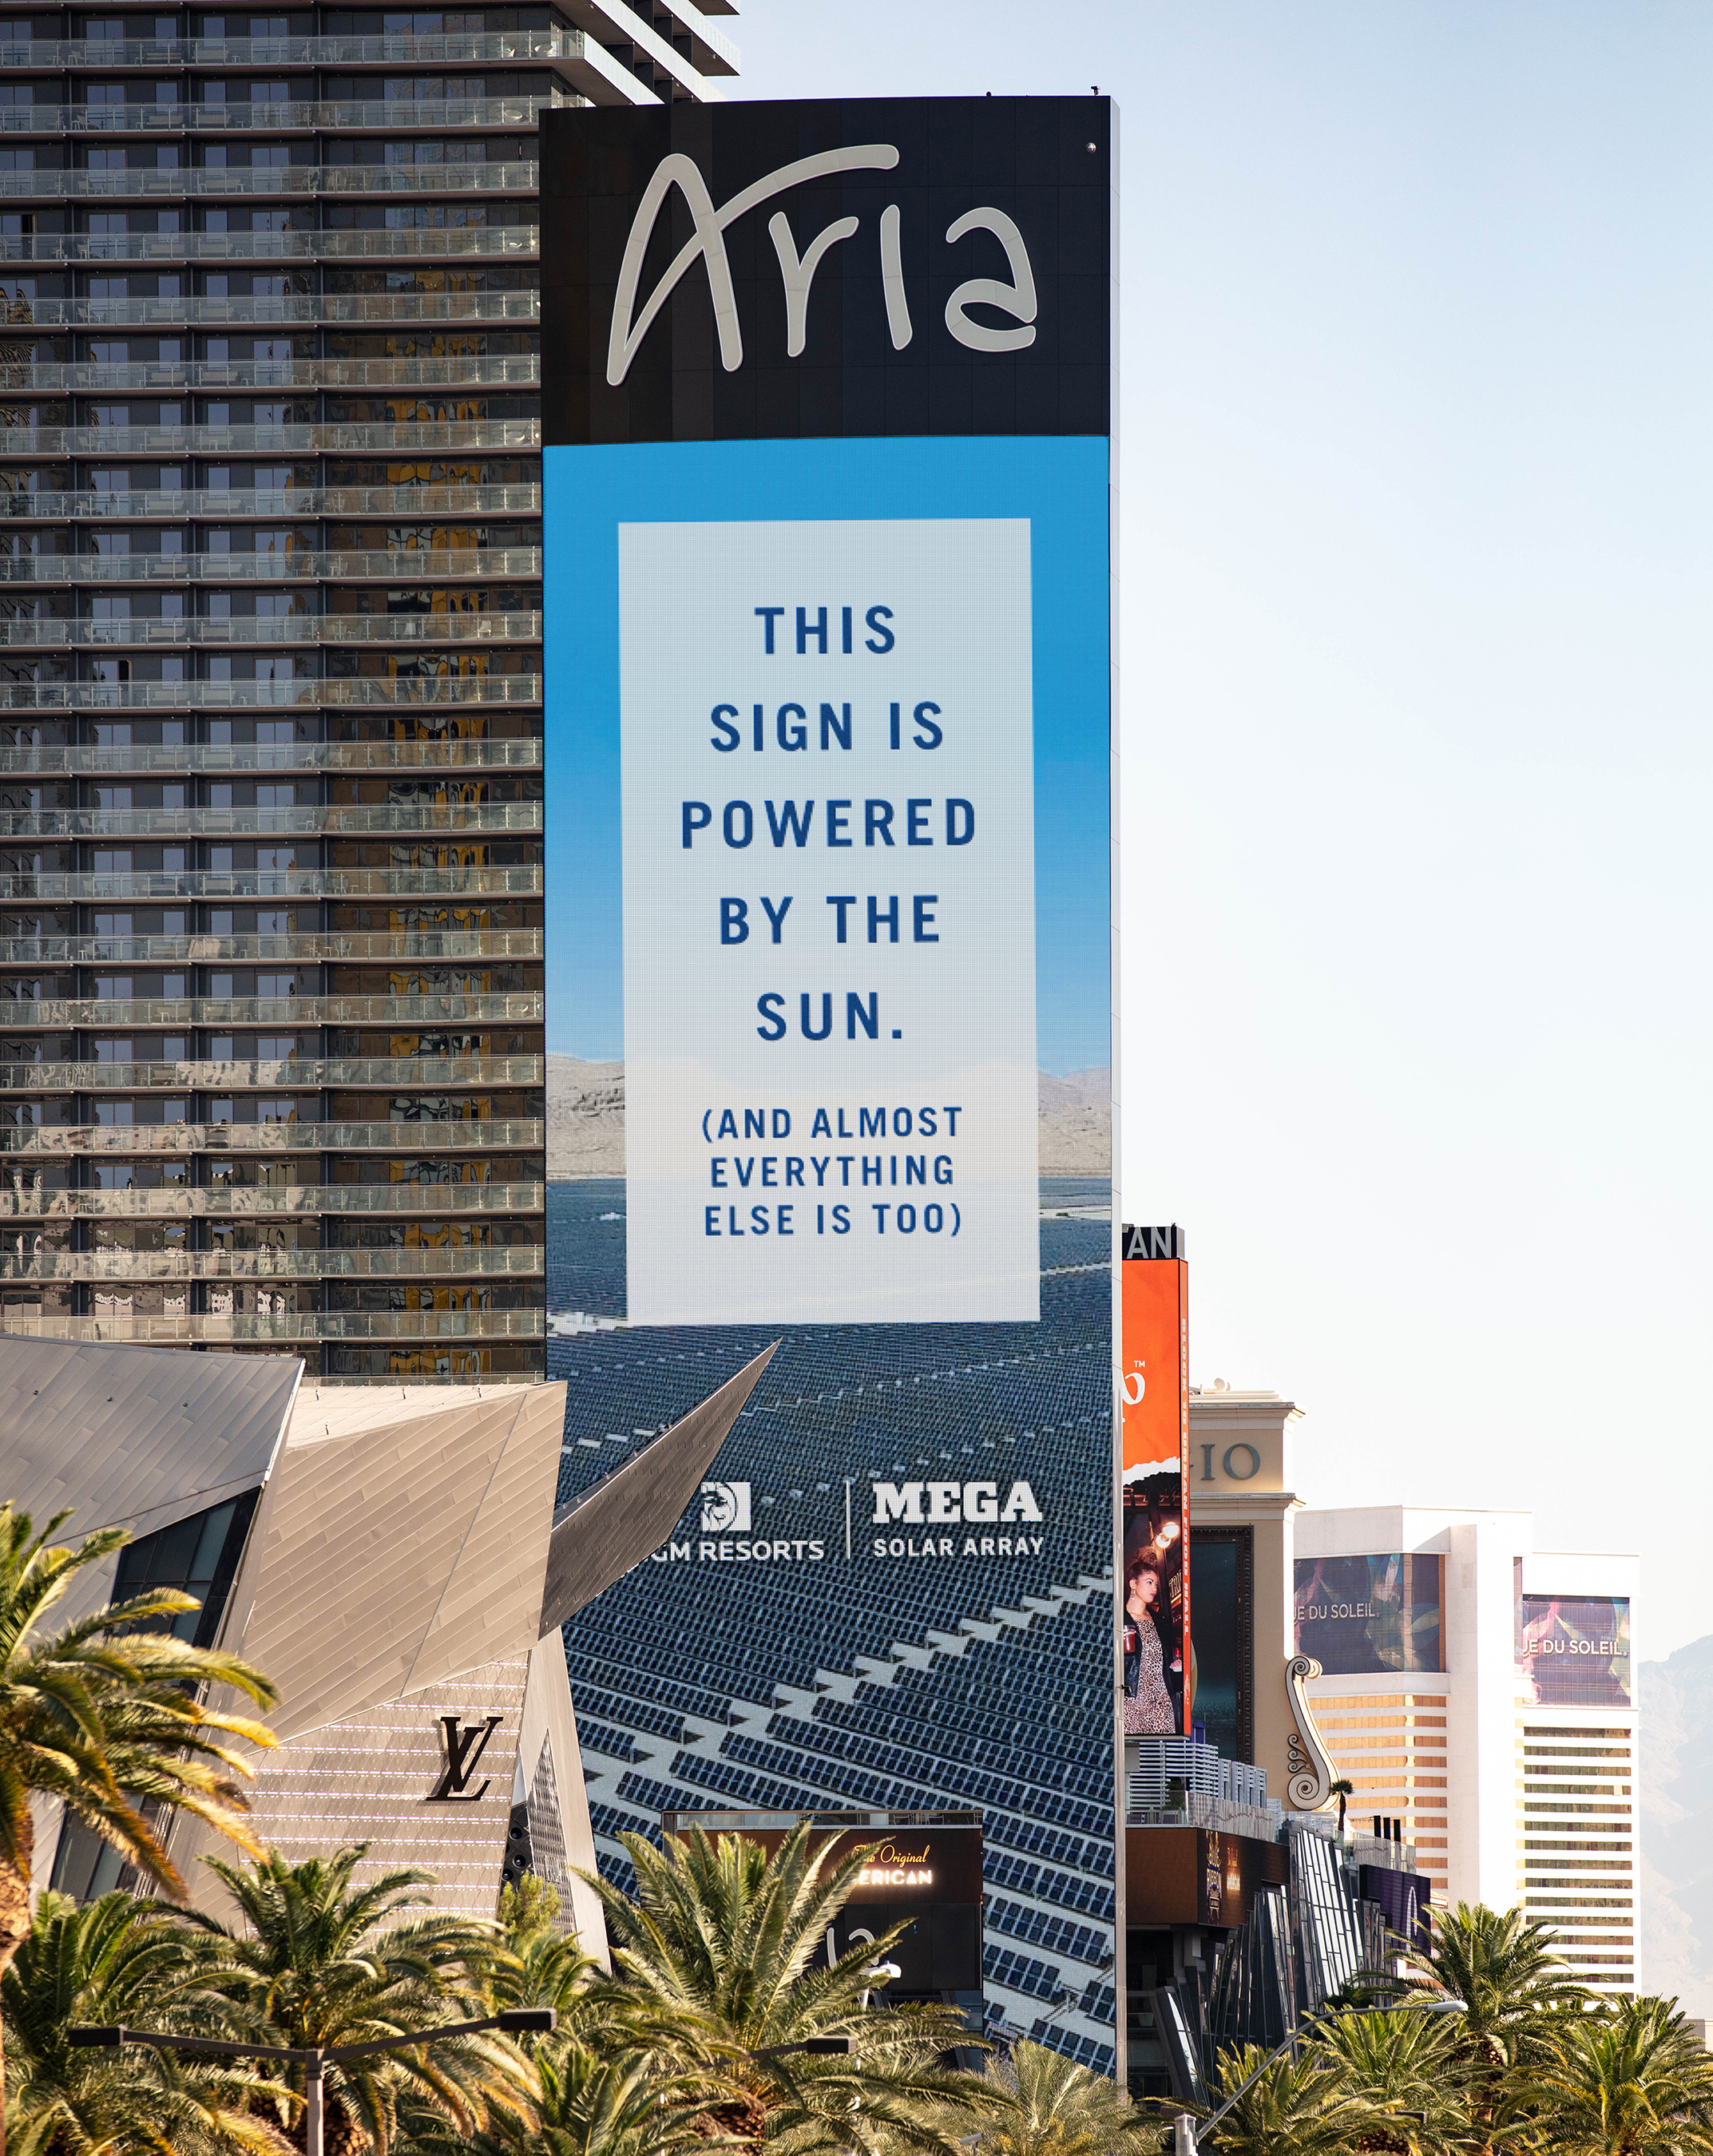 Powered by the Sun: The solar array’s clean energy now produces up to 90% of MGM Resorts’ Las Vegas daytime power needs at its 13 Strip properties.